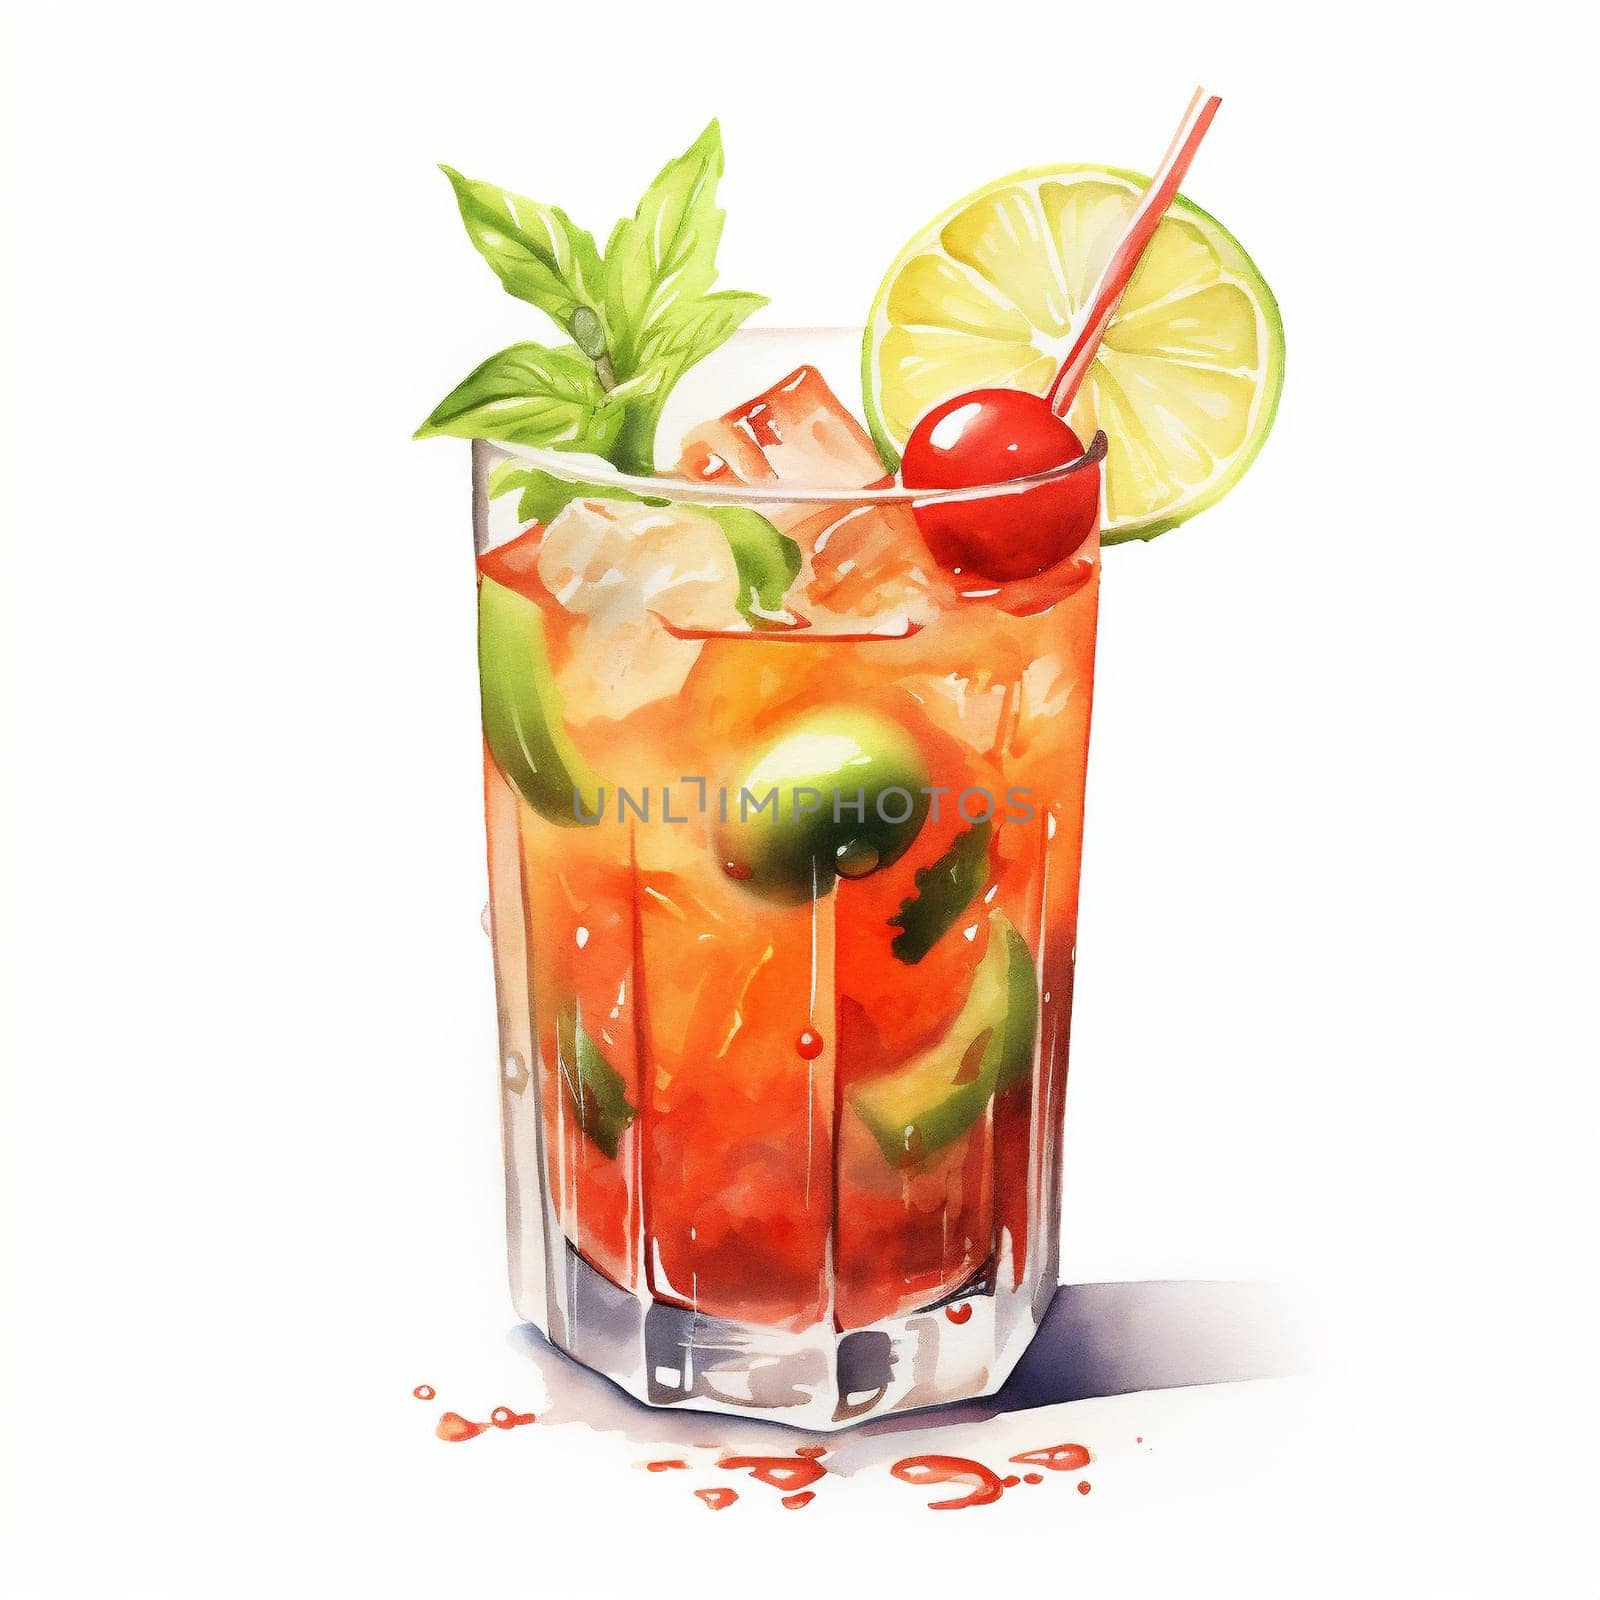 Cocktail Bloody Mary with Cherry Tomatoes and Celery Leaves. by Rina_Dozornaya